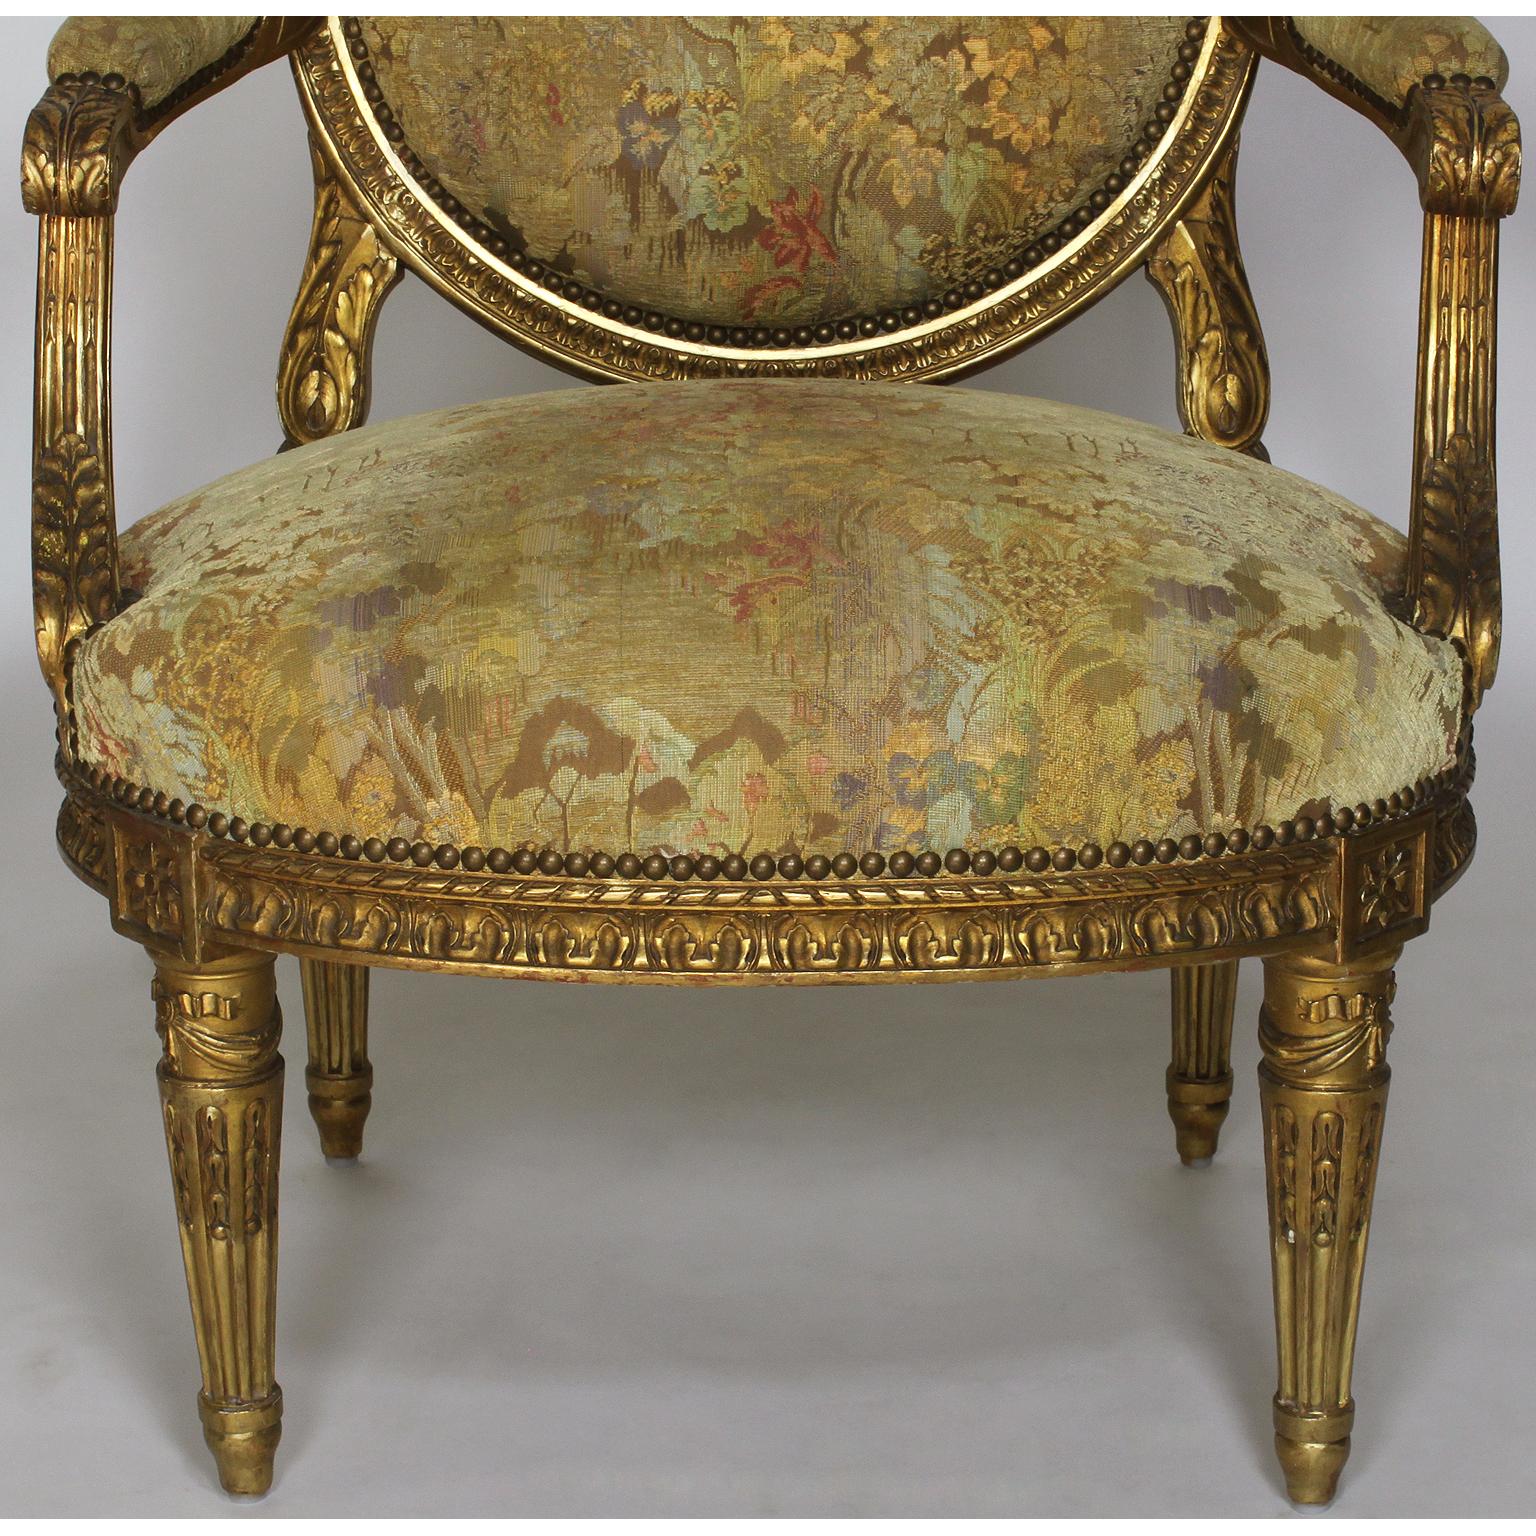 Fine French 19th Century Louis XVI Style Giltwood Carved Five-Piece Salon Suite For Sale 5